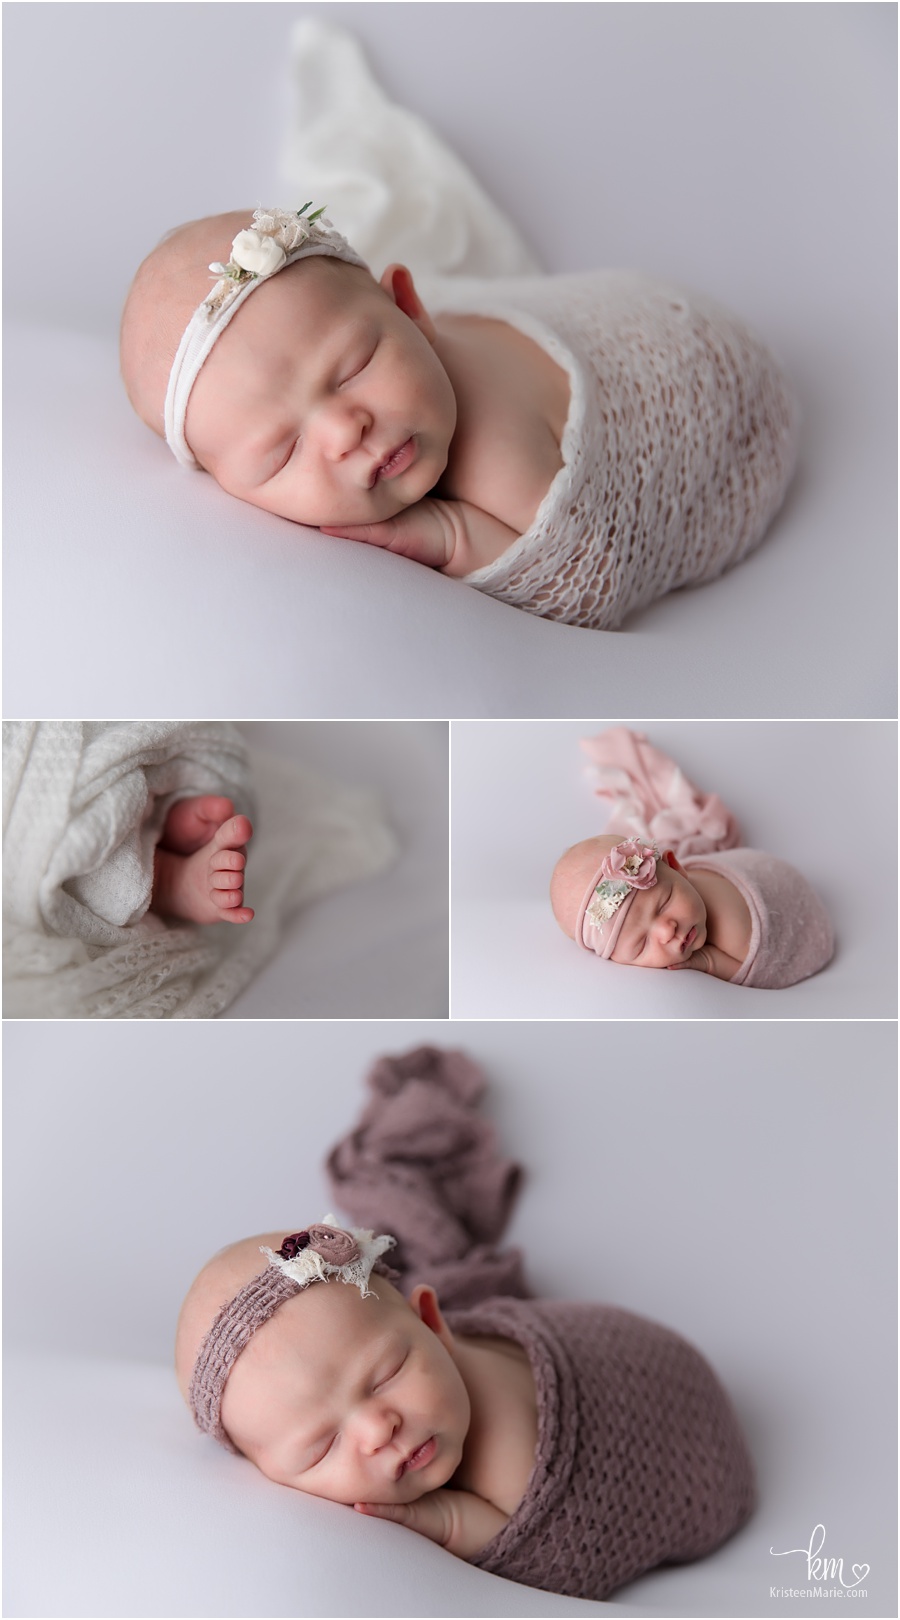 Newborn baby girl - sweet and simple sleeping pictures